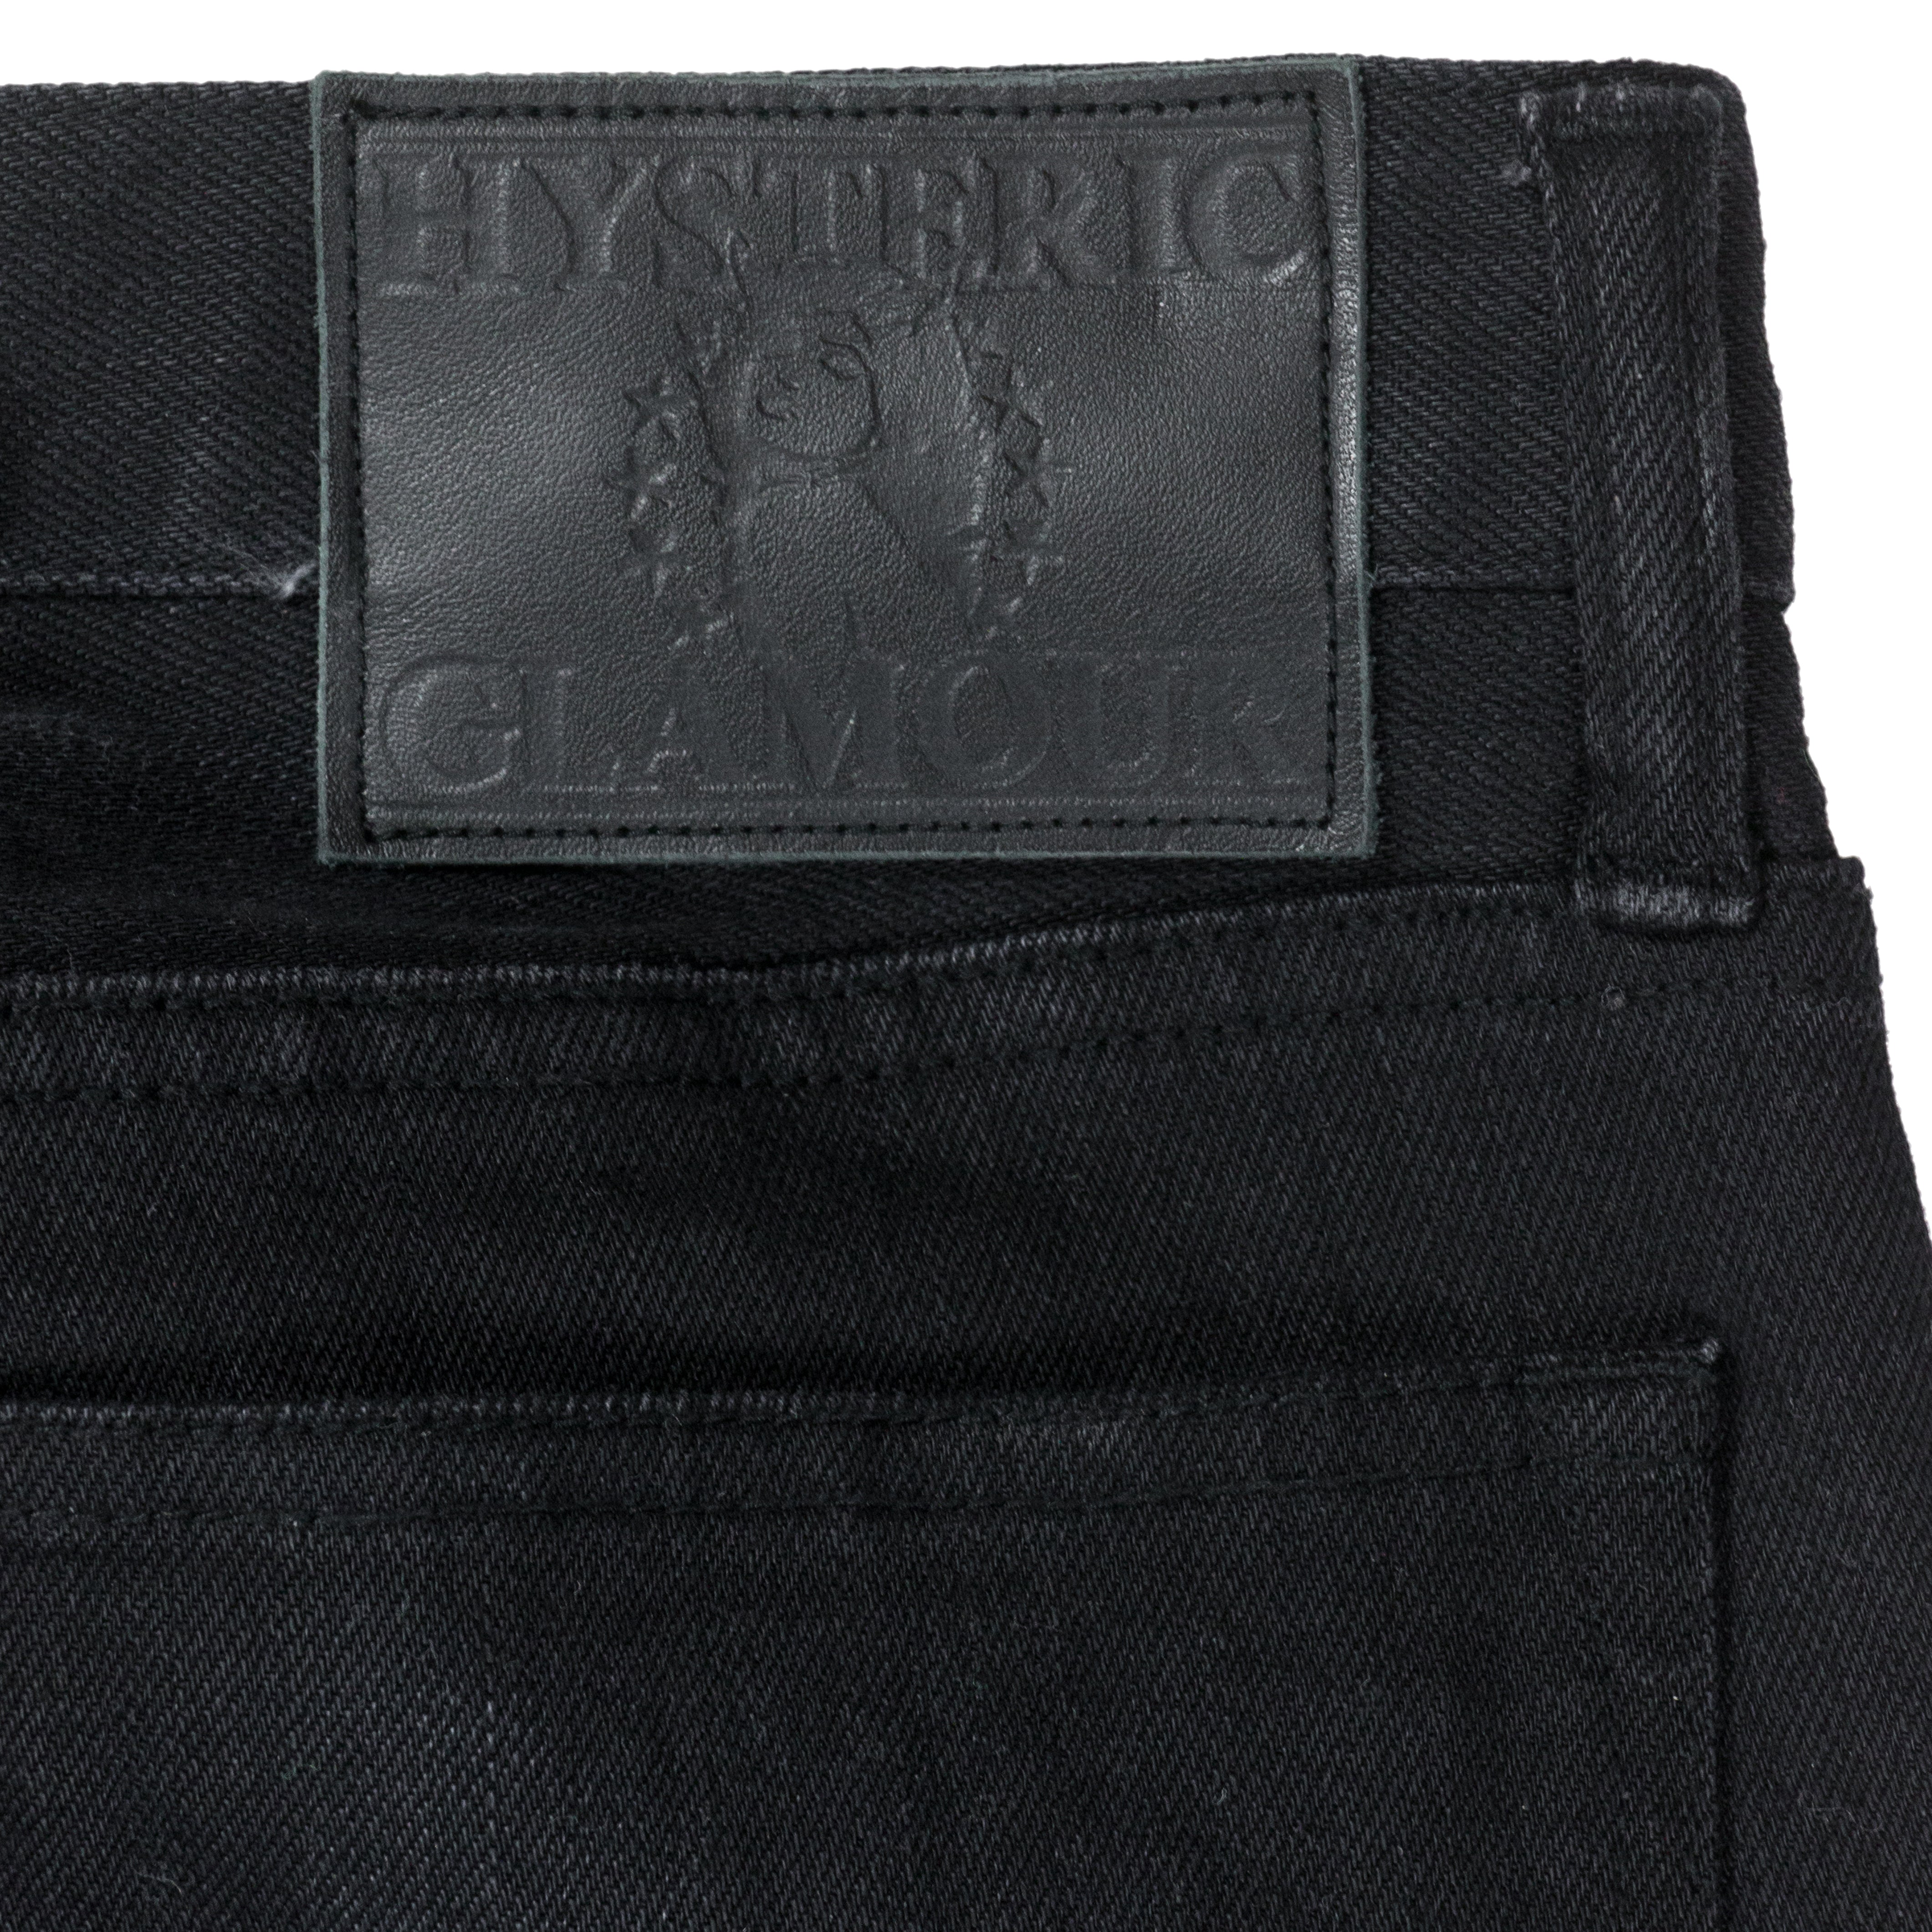 Hysteric Glamour Black Studded Skinny Jeans - SILVER LEAGUE